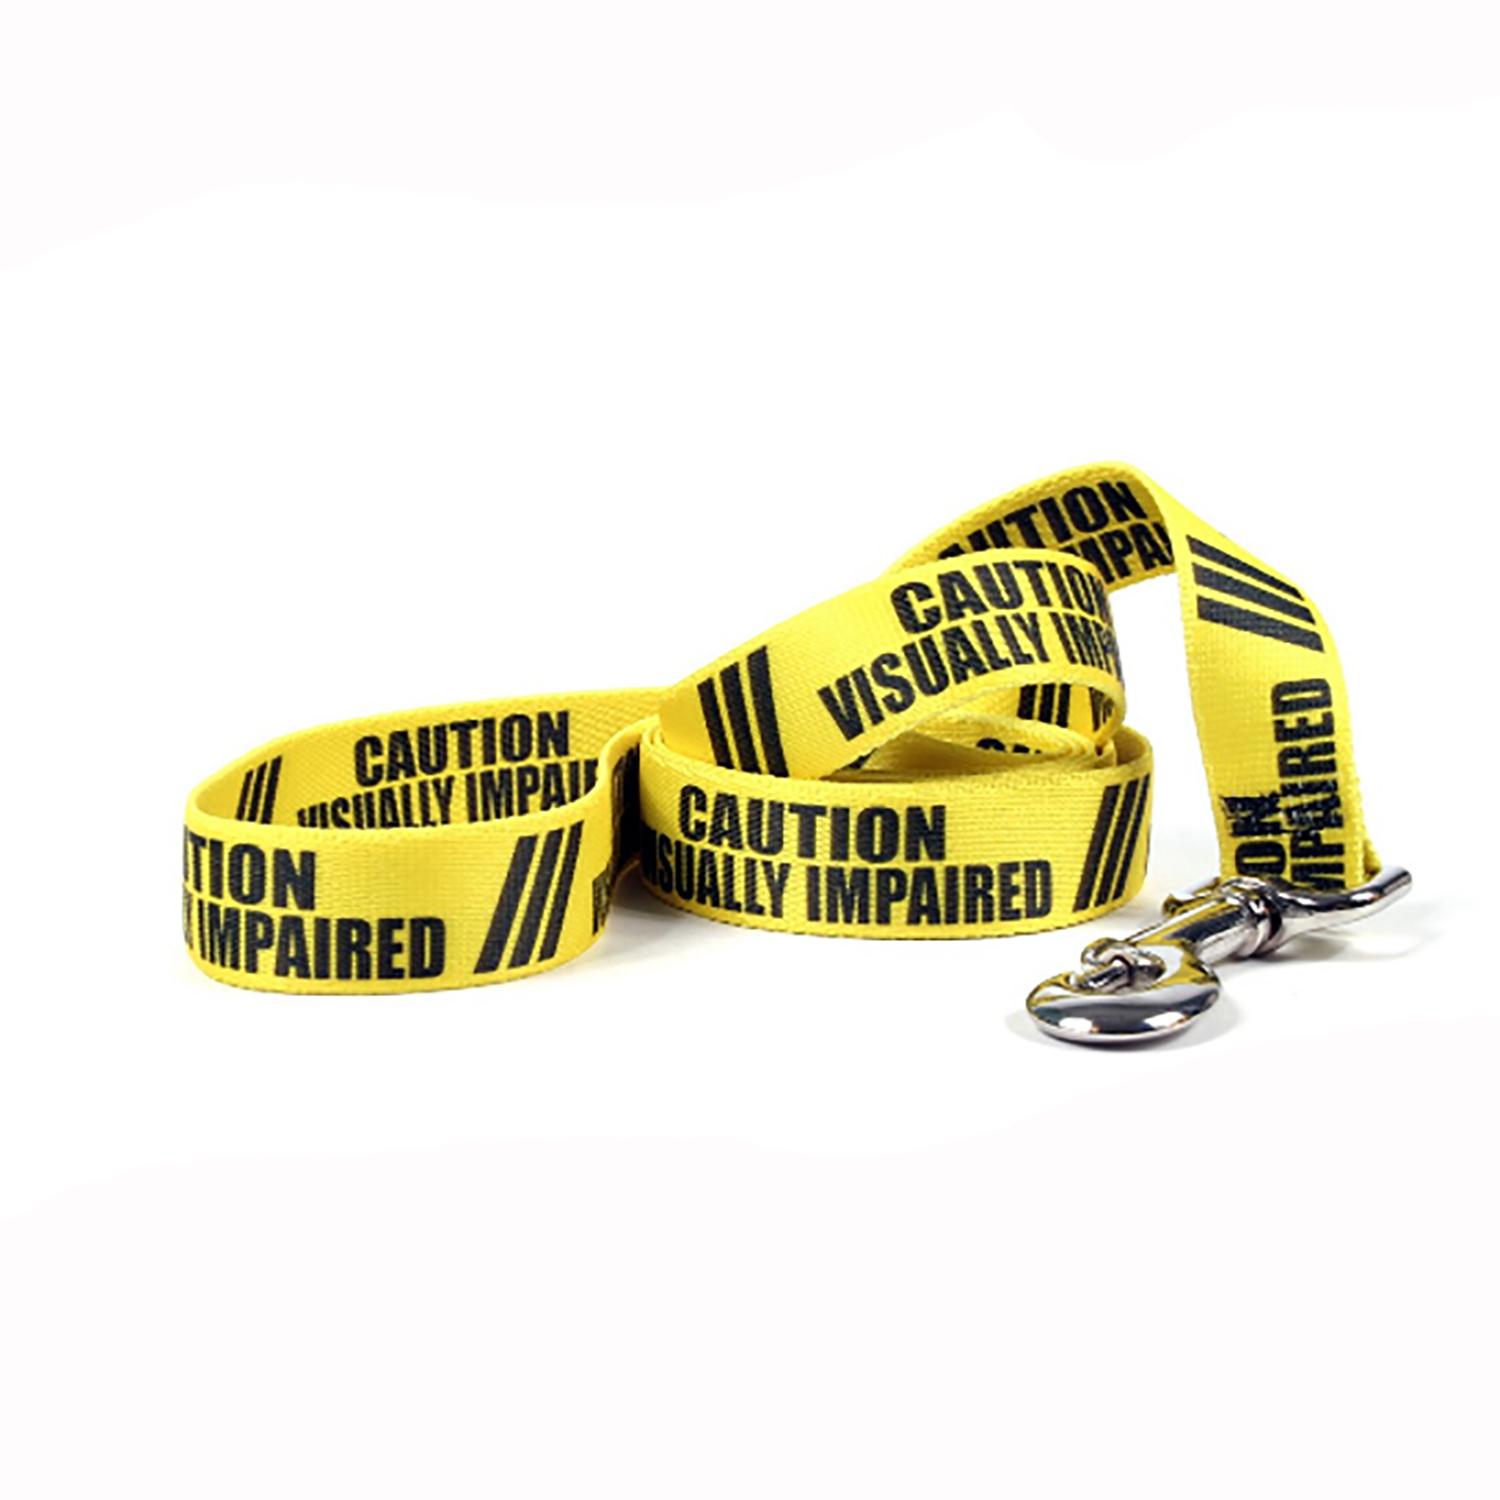 Caution Dog Leash by Yellow Dog - Visually Impaired